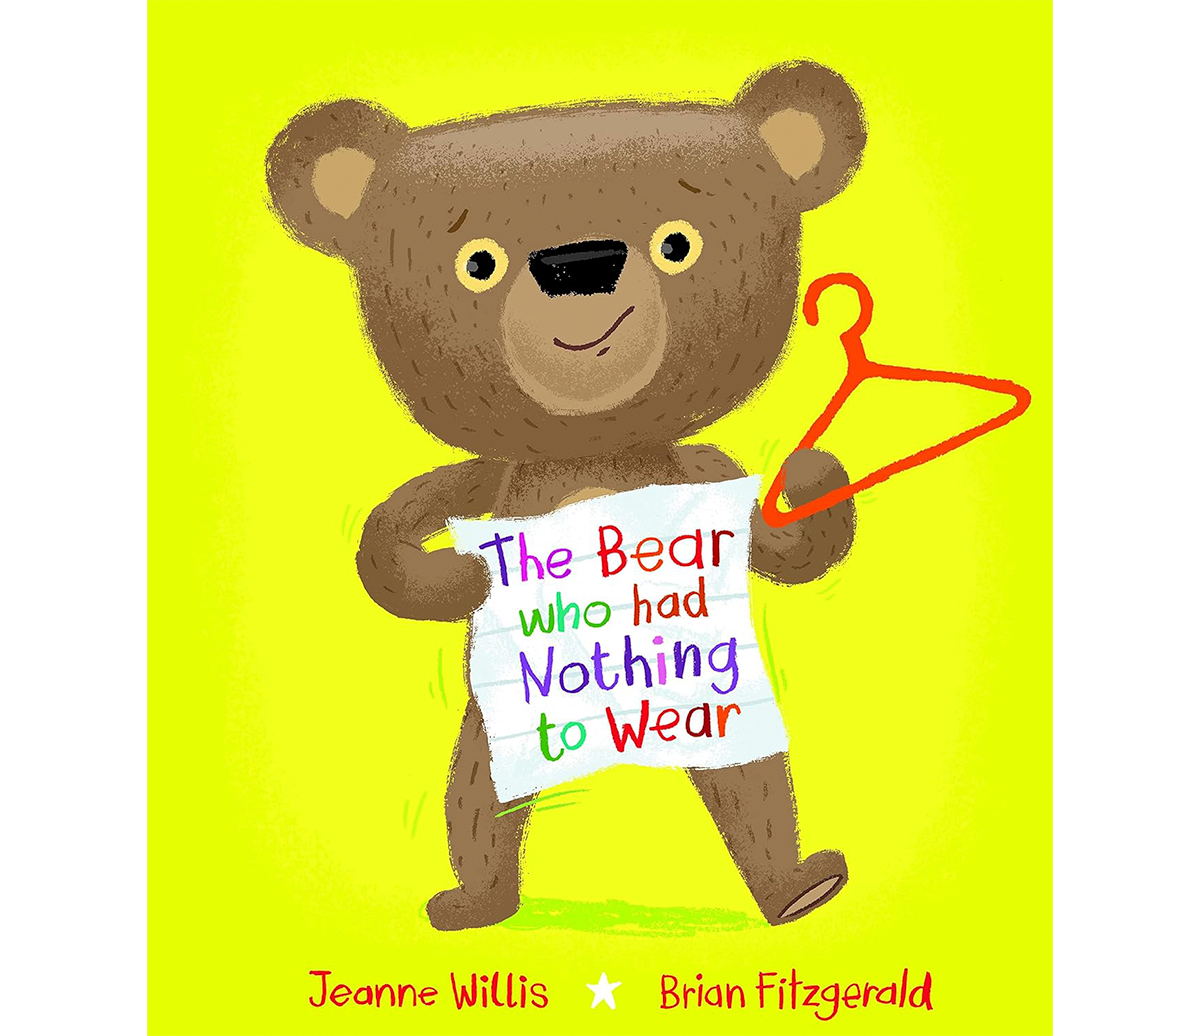 jeanne-willis-the-bear-who-had-nothing-to-wear.png